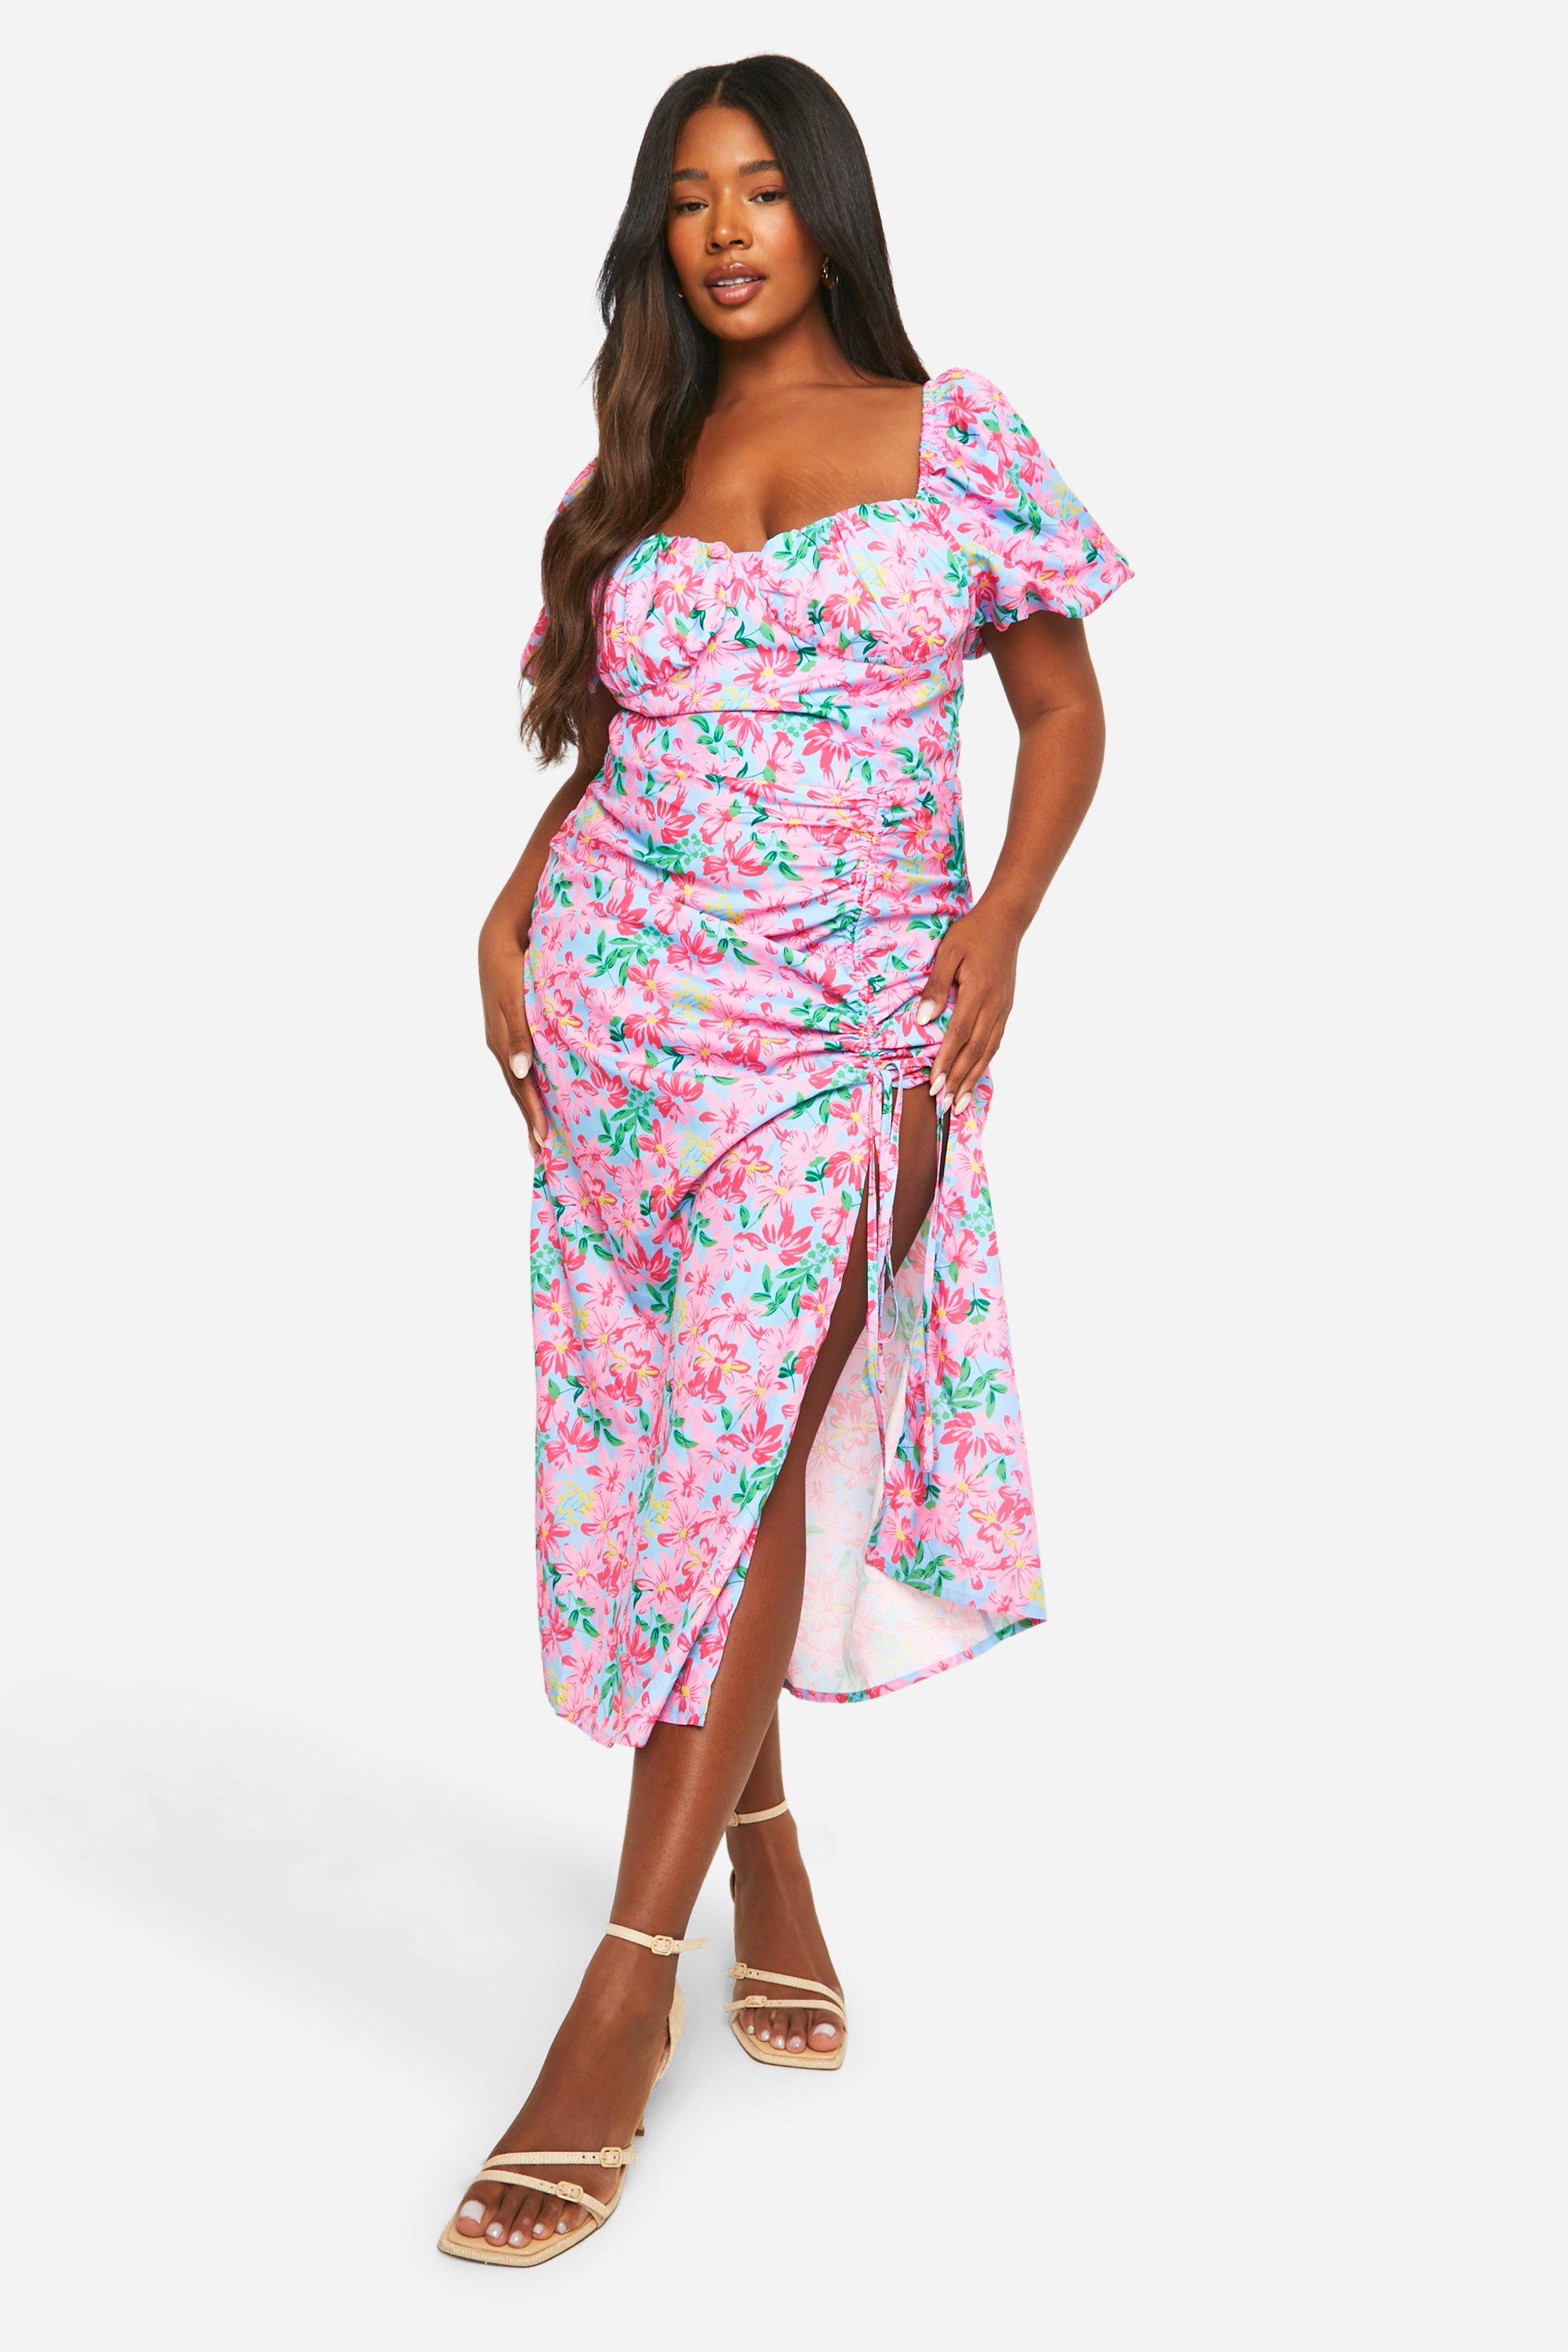 Boohoo Plus Woven Ditsy Floral Ruched Midaxi Dress, Pink